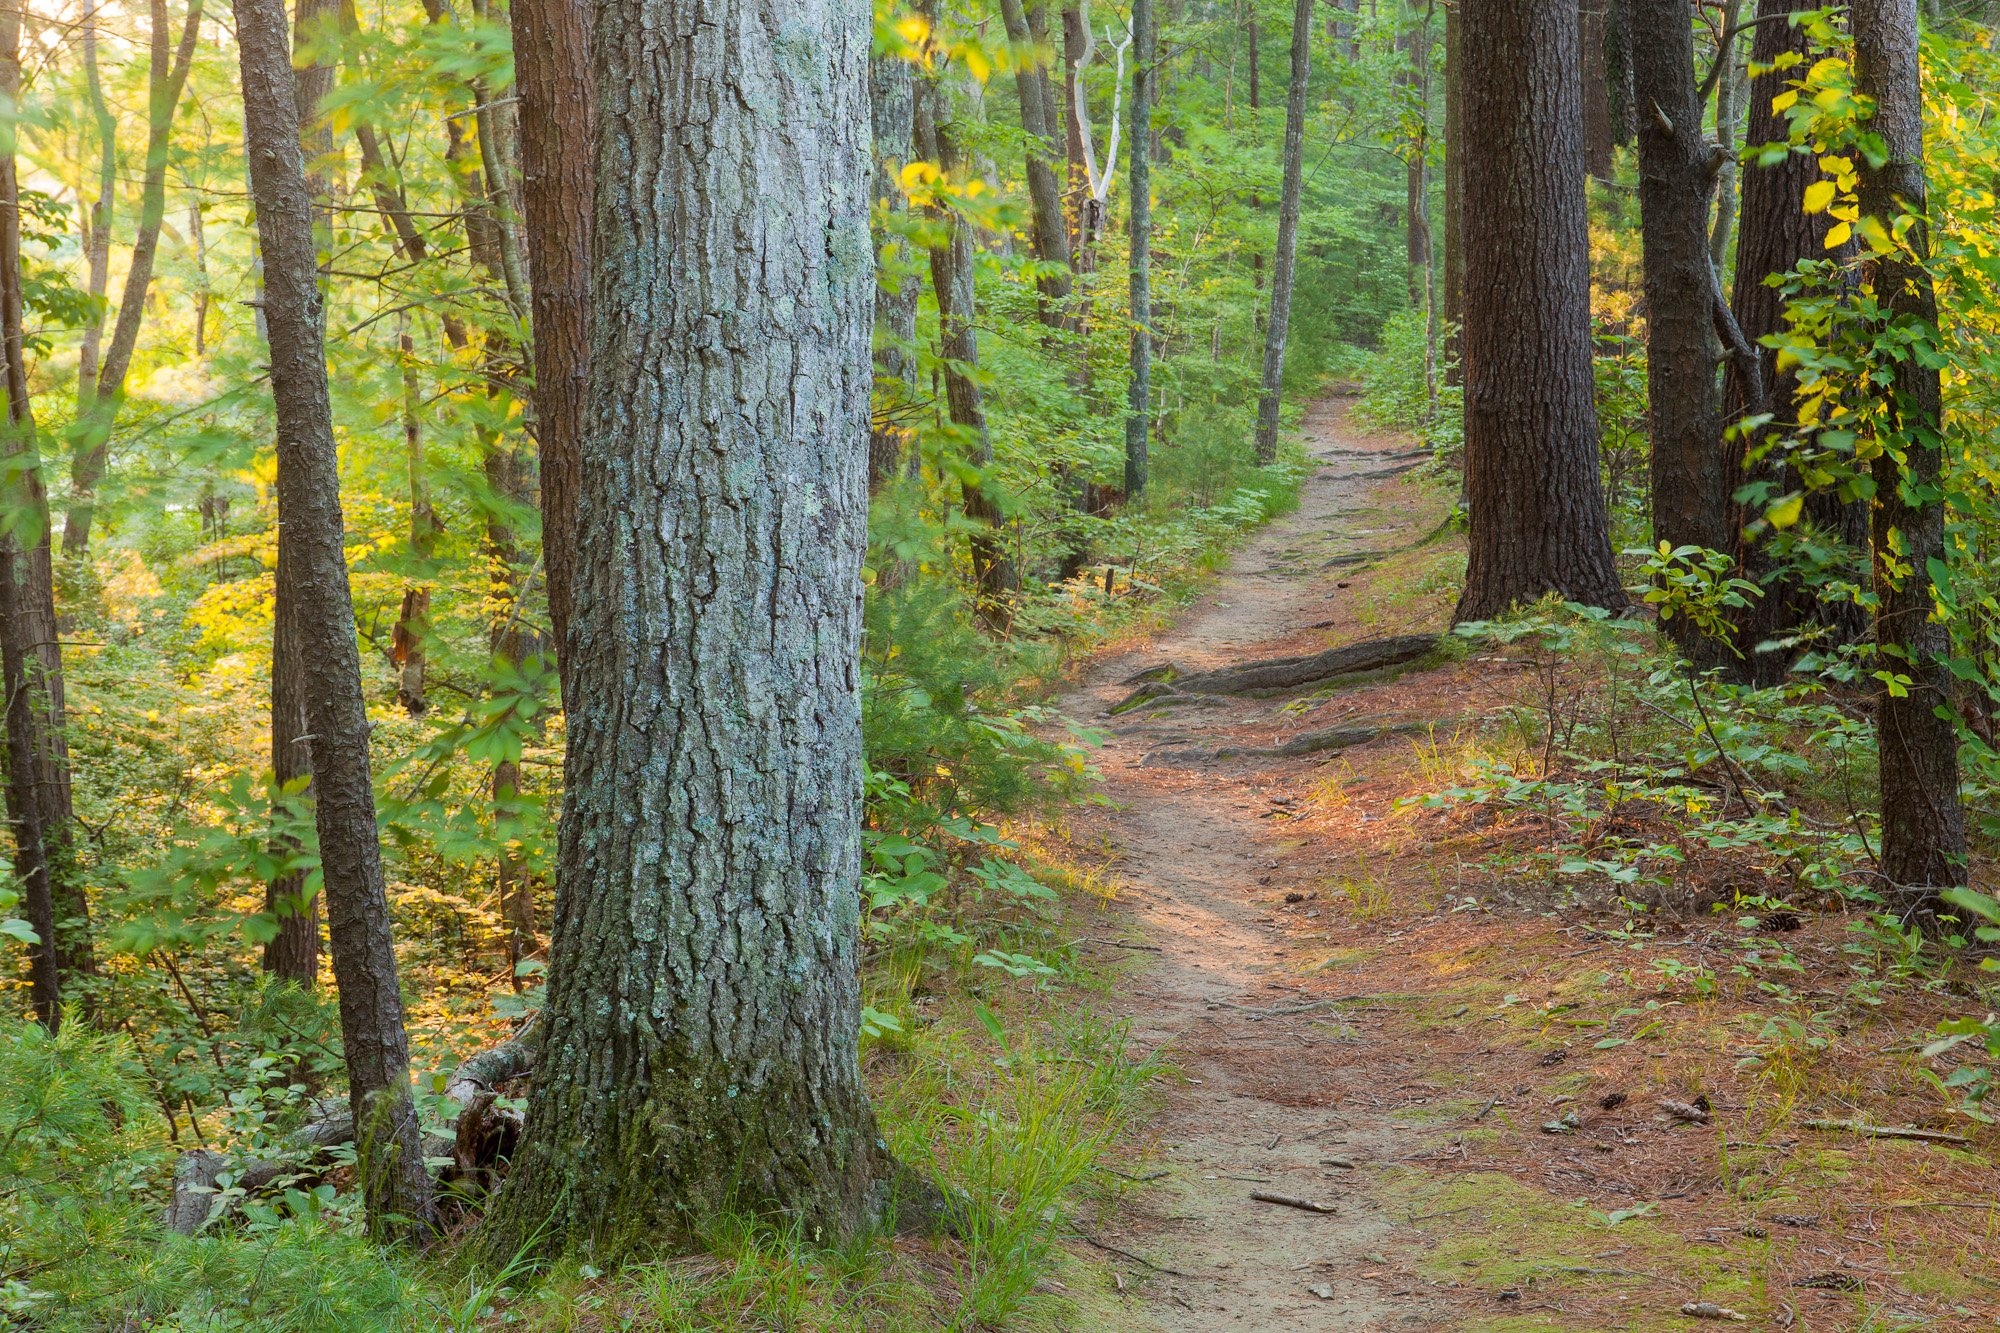  A trail in the forest at the O.W. Stewart Preserve in Kingston, Massachusetts. 